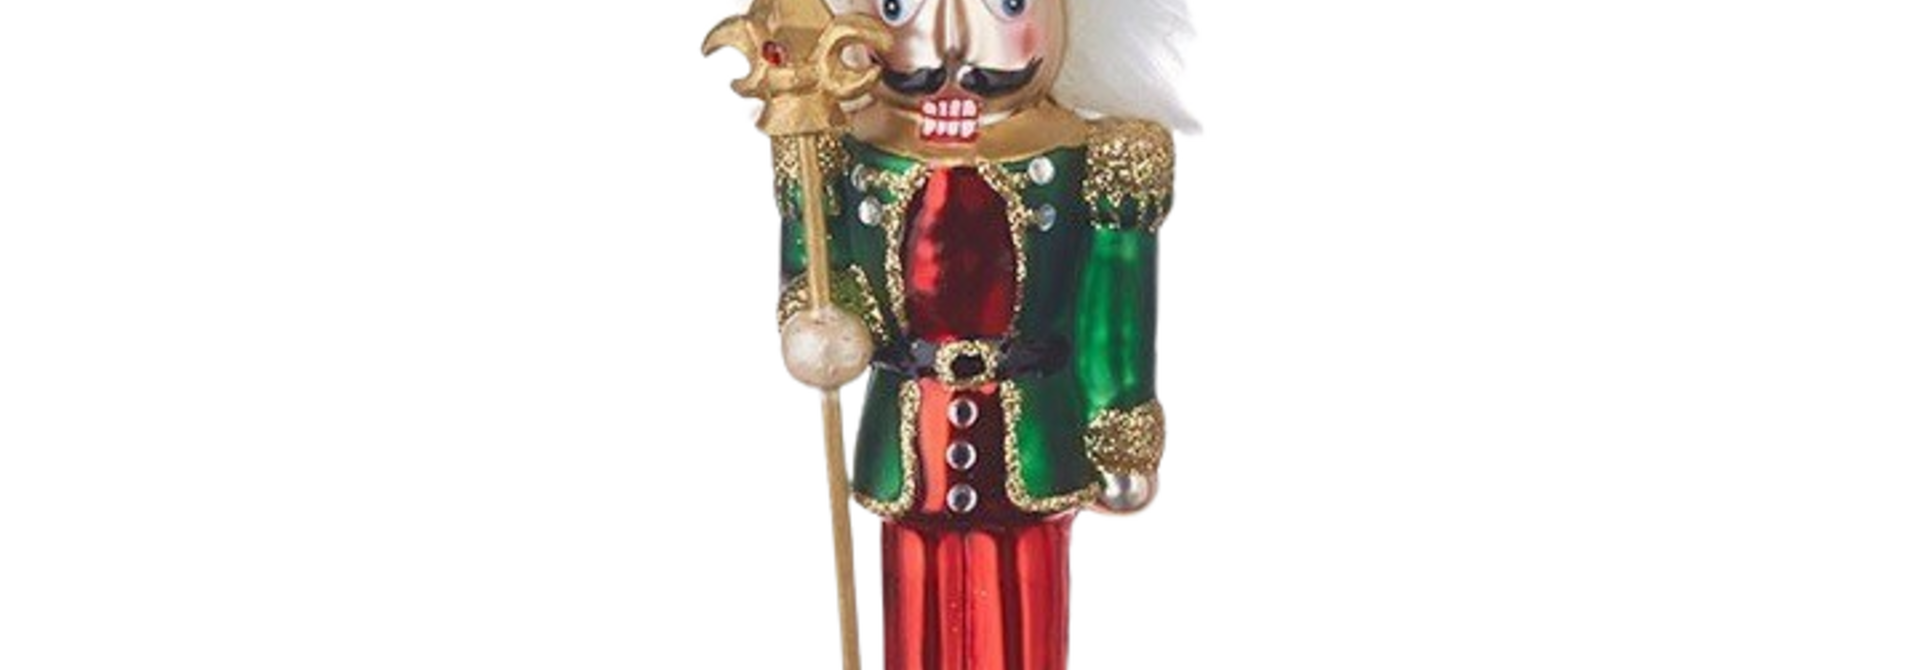 Ludwig Nutcracker | The Holiday Ornament Collection, Green - 2 Inch x 1.5 Inch x 6.5 Inch